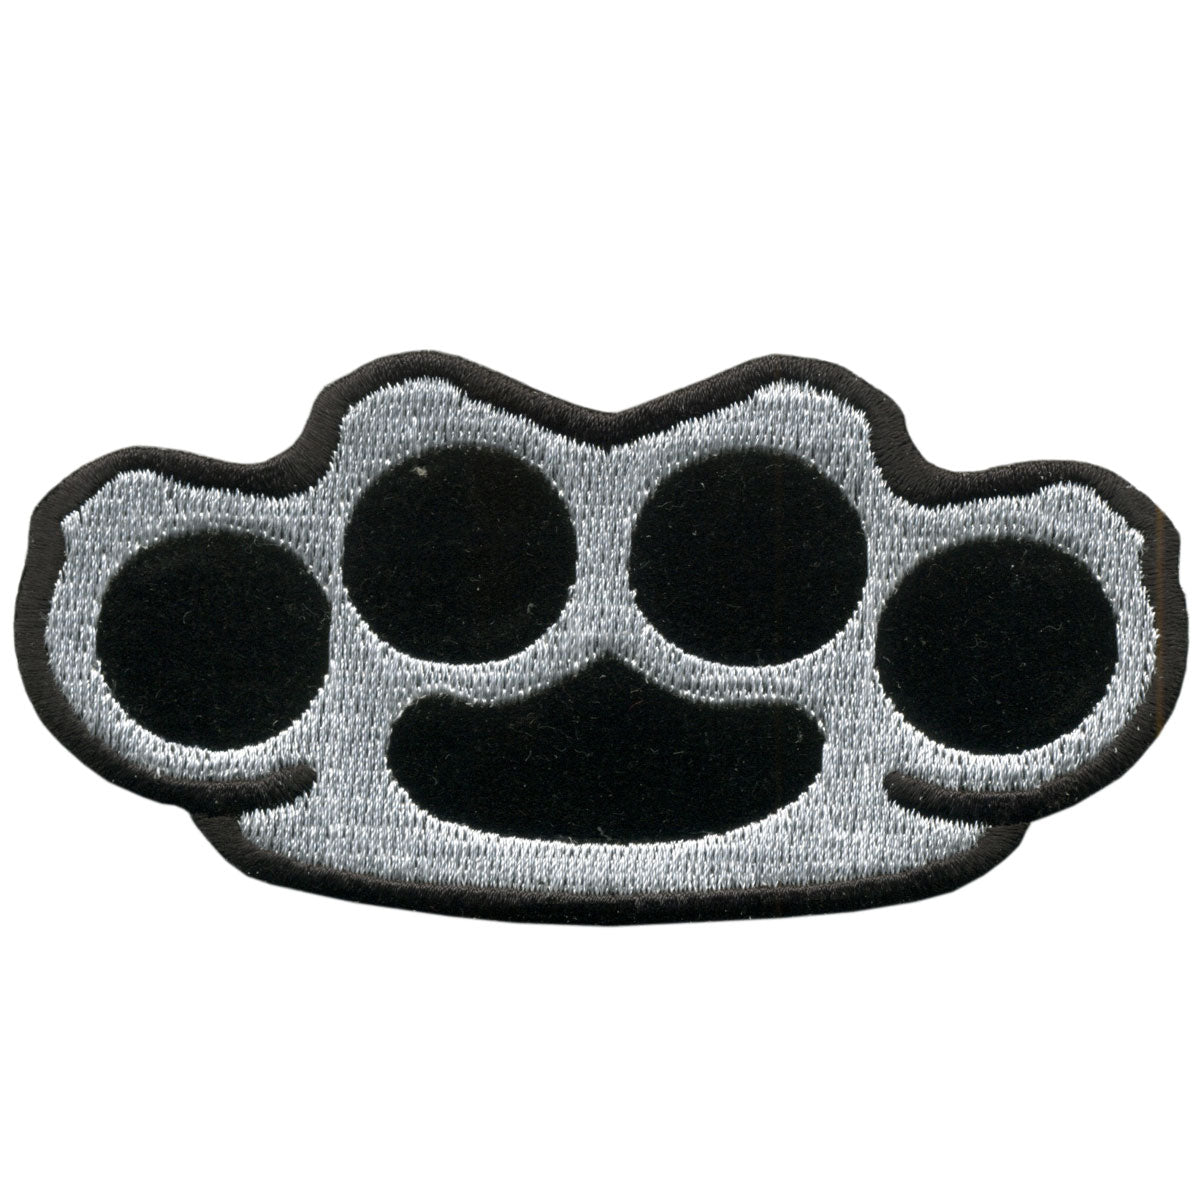 Hot Leathers PPA3122 Brass Knuckles 4" x 2" Patch